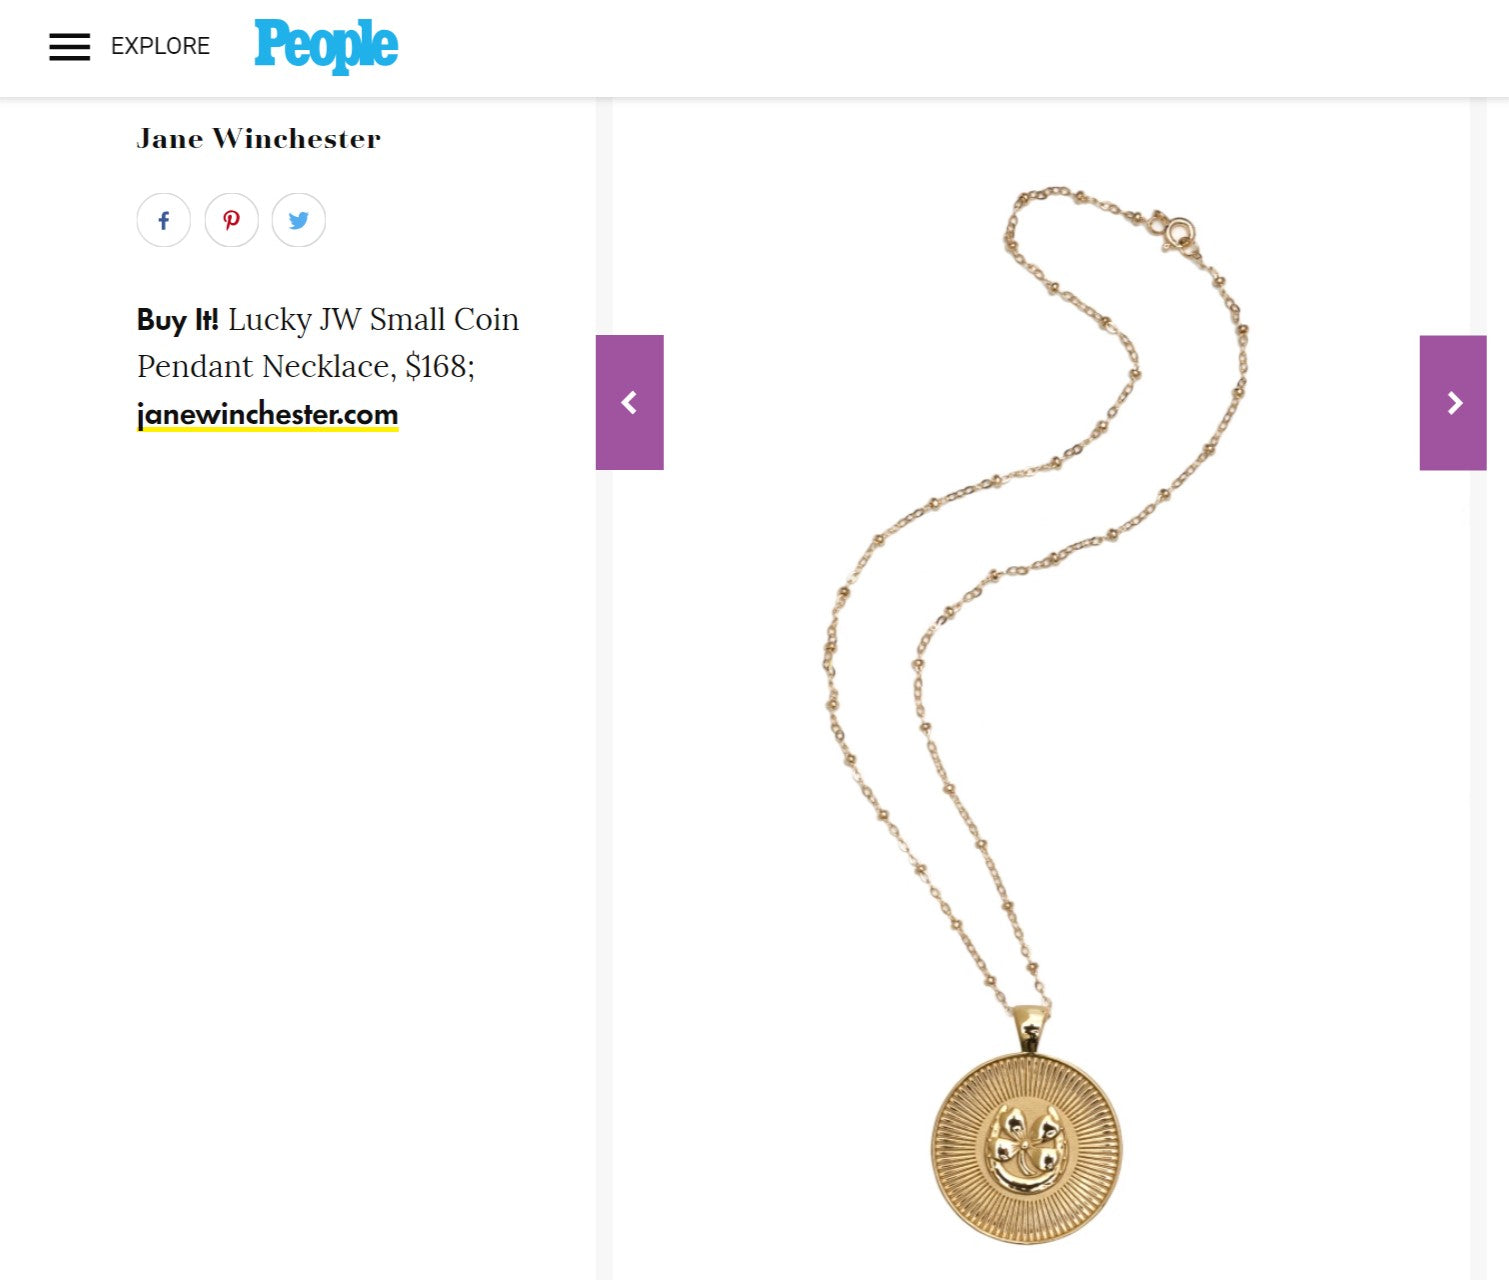 People.com Loves the Coin Jewelry Trend and Jane Winchester